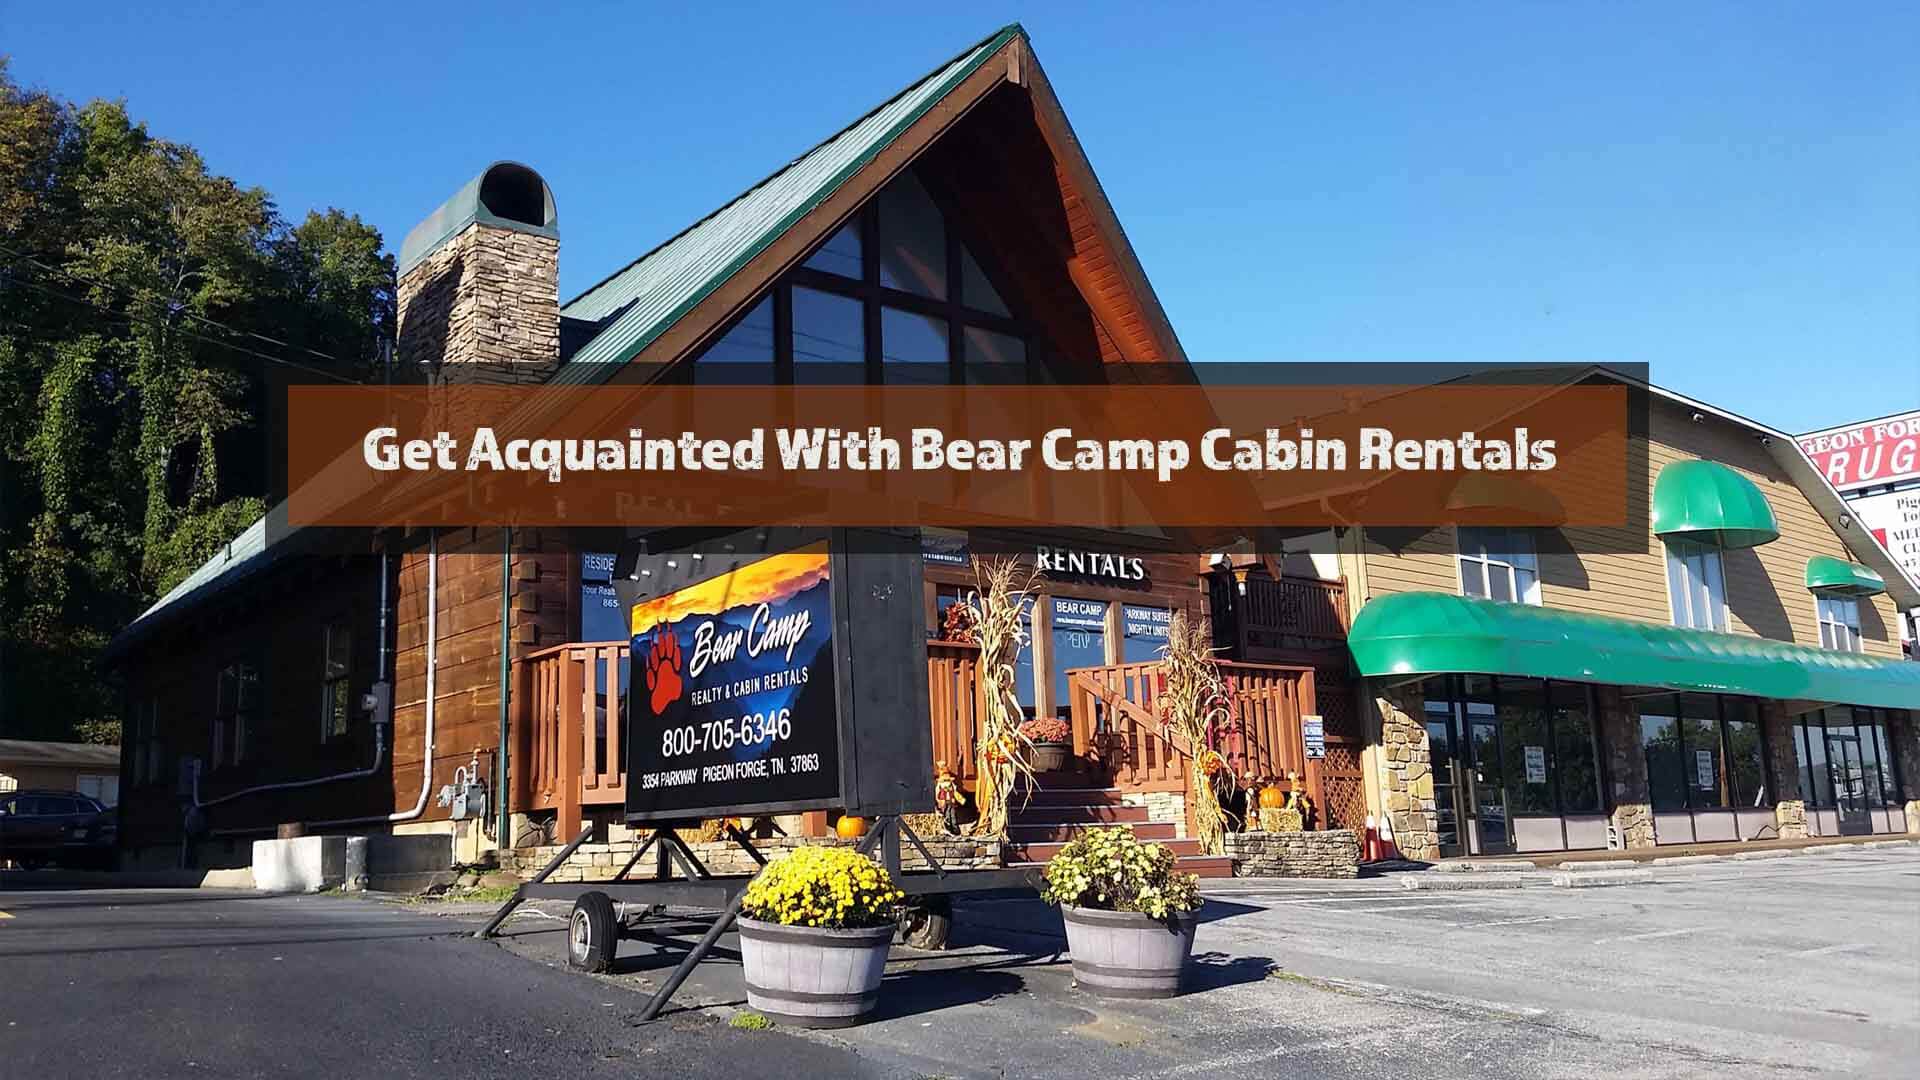 Get-Acquainted-With-Bear-Camp-Cabin-Rentals.jpg